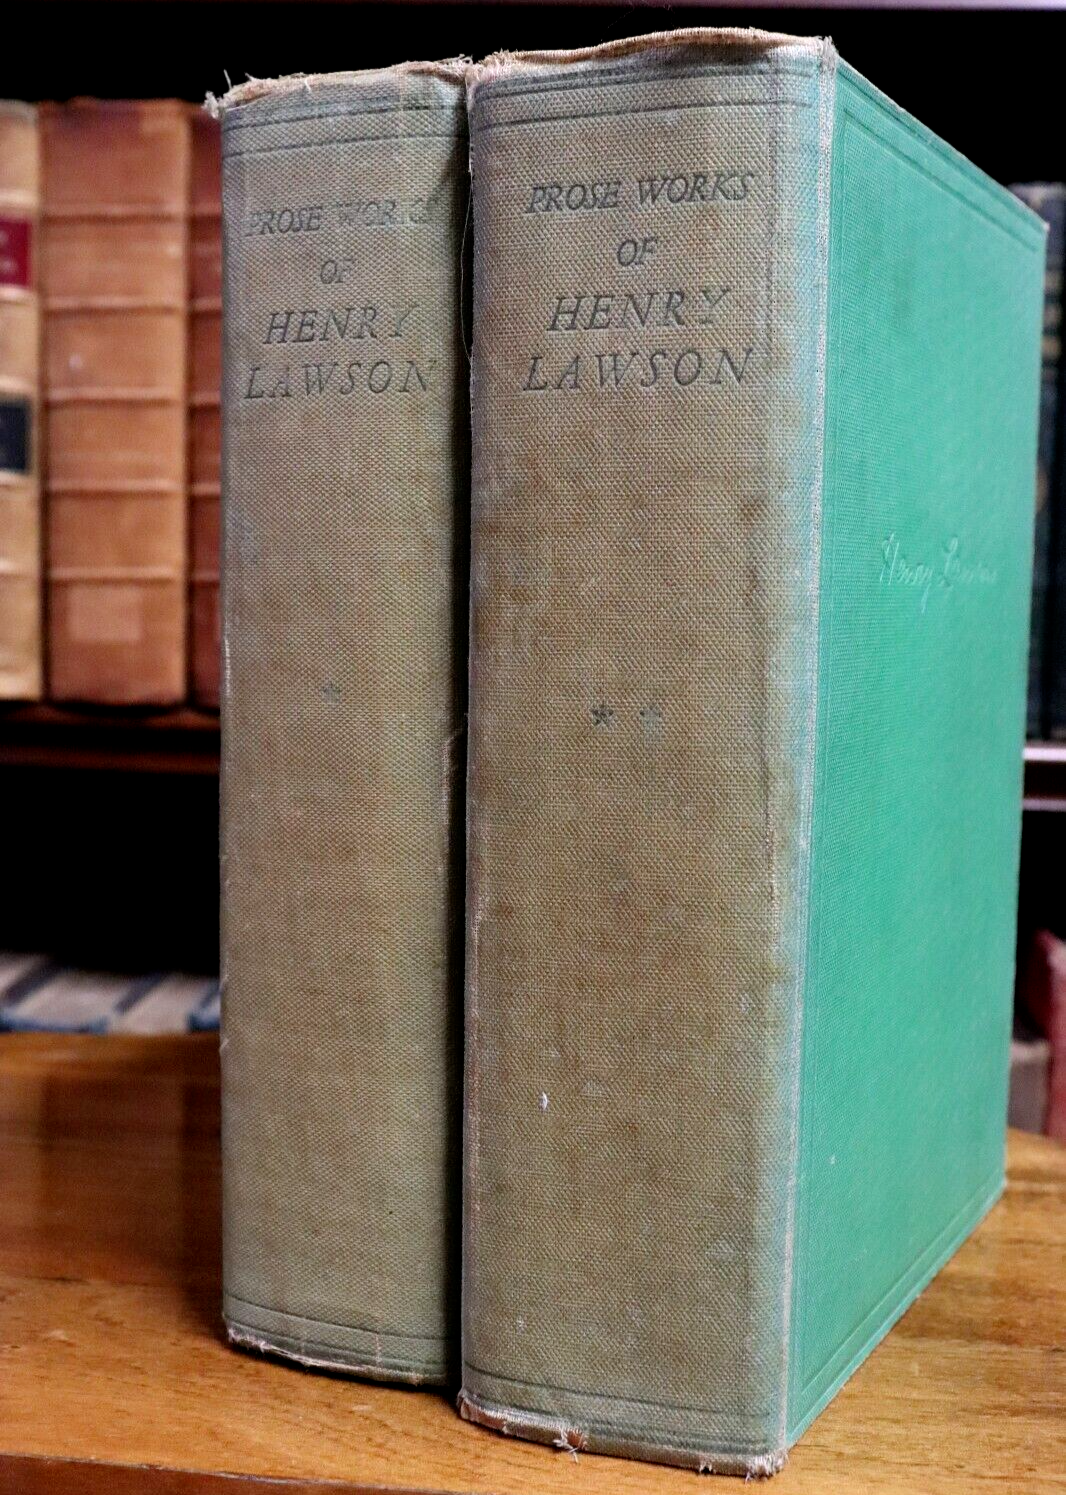 1935 2vol The Prose Works Of Henry Lawson Antique Australian Poetry Book Set